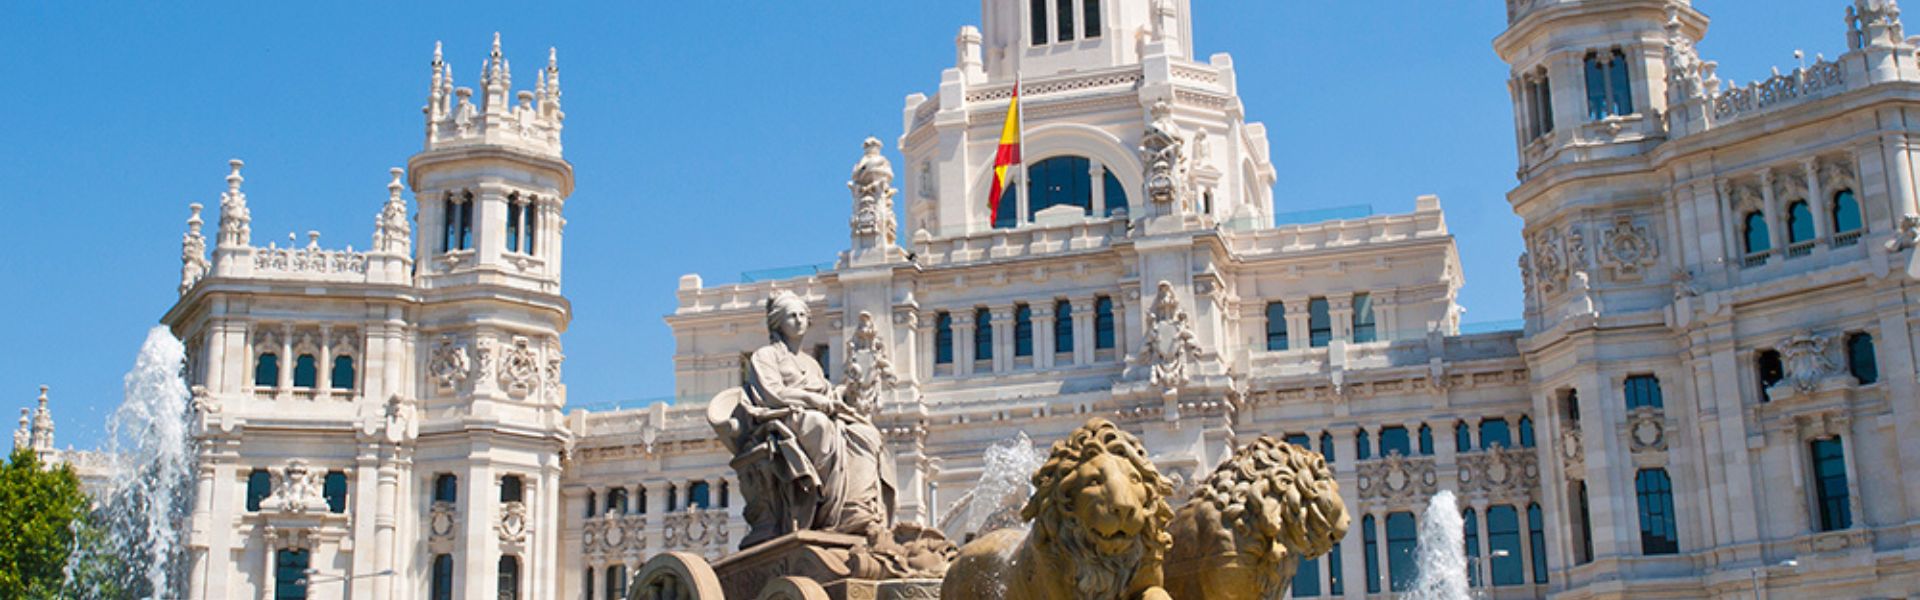 Madrid Palace Discover Spain Campaign scrolling banner 10Jan23